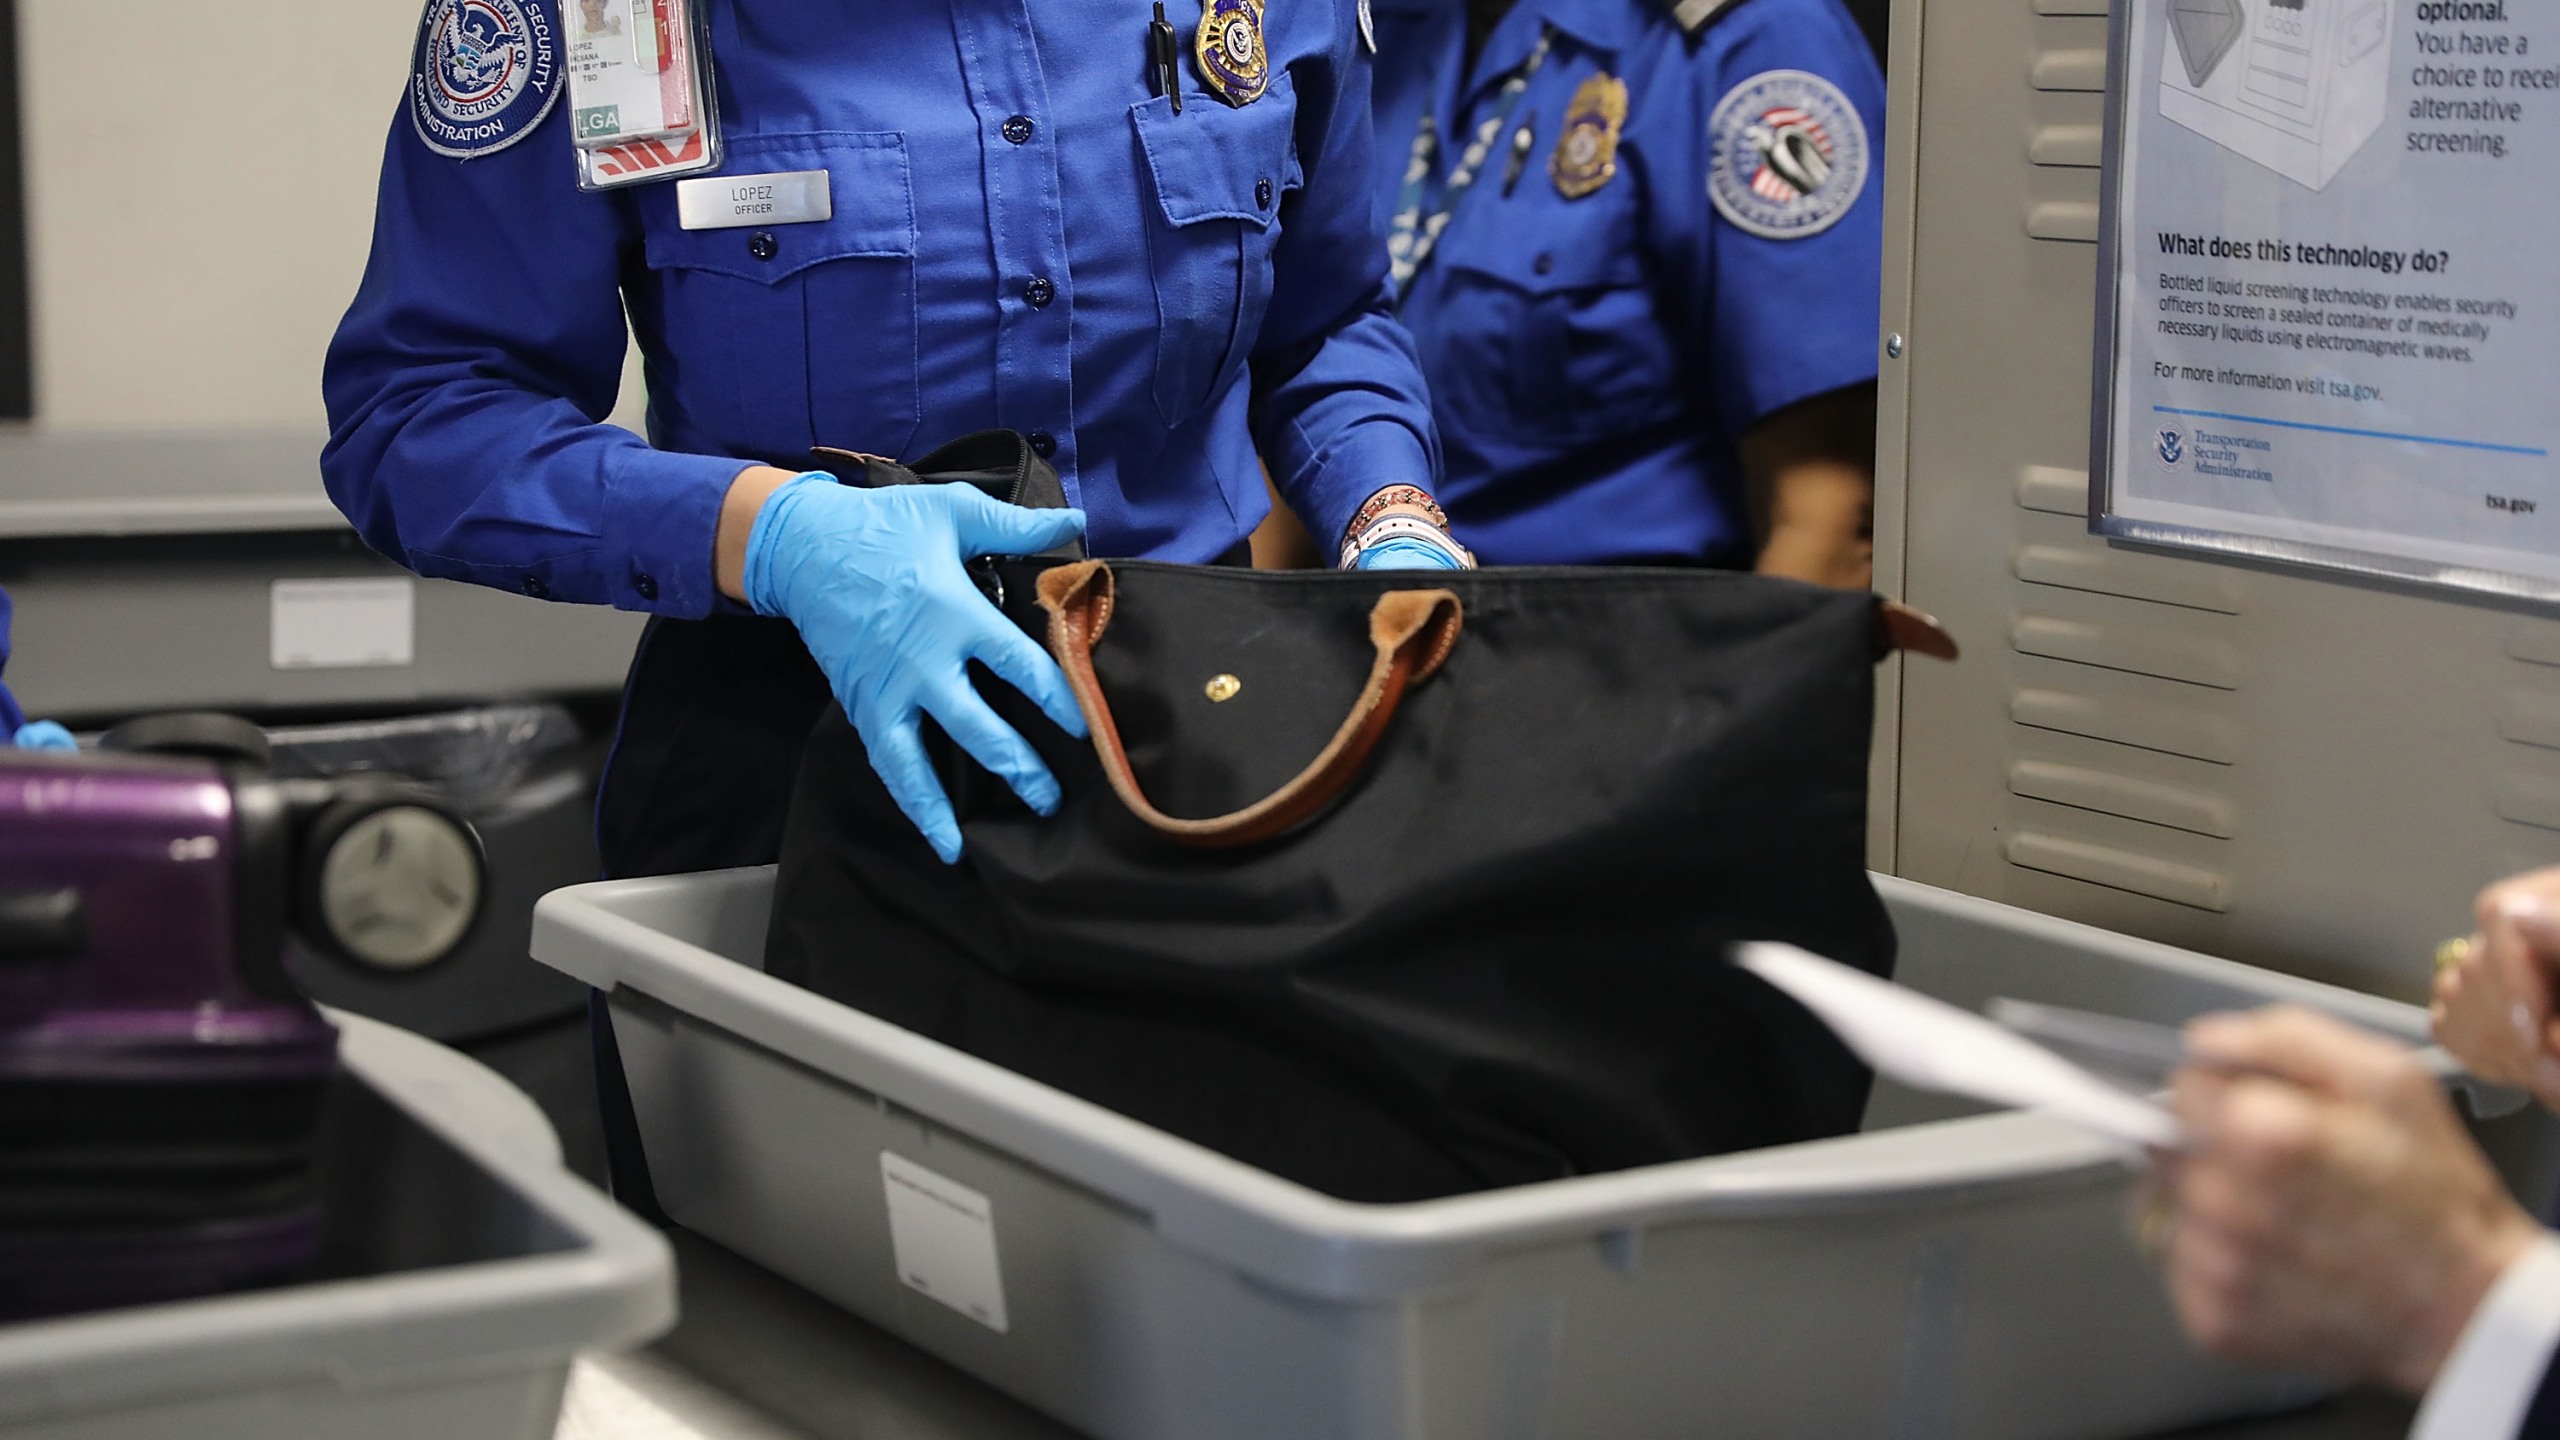 Record number of guns found at U.S. airports in 2021